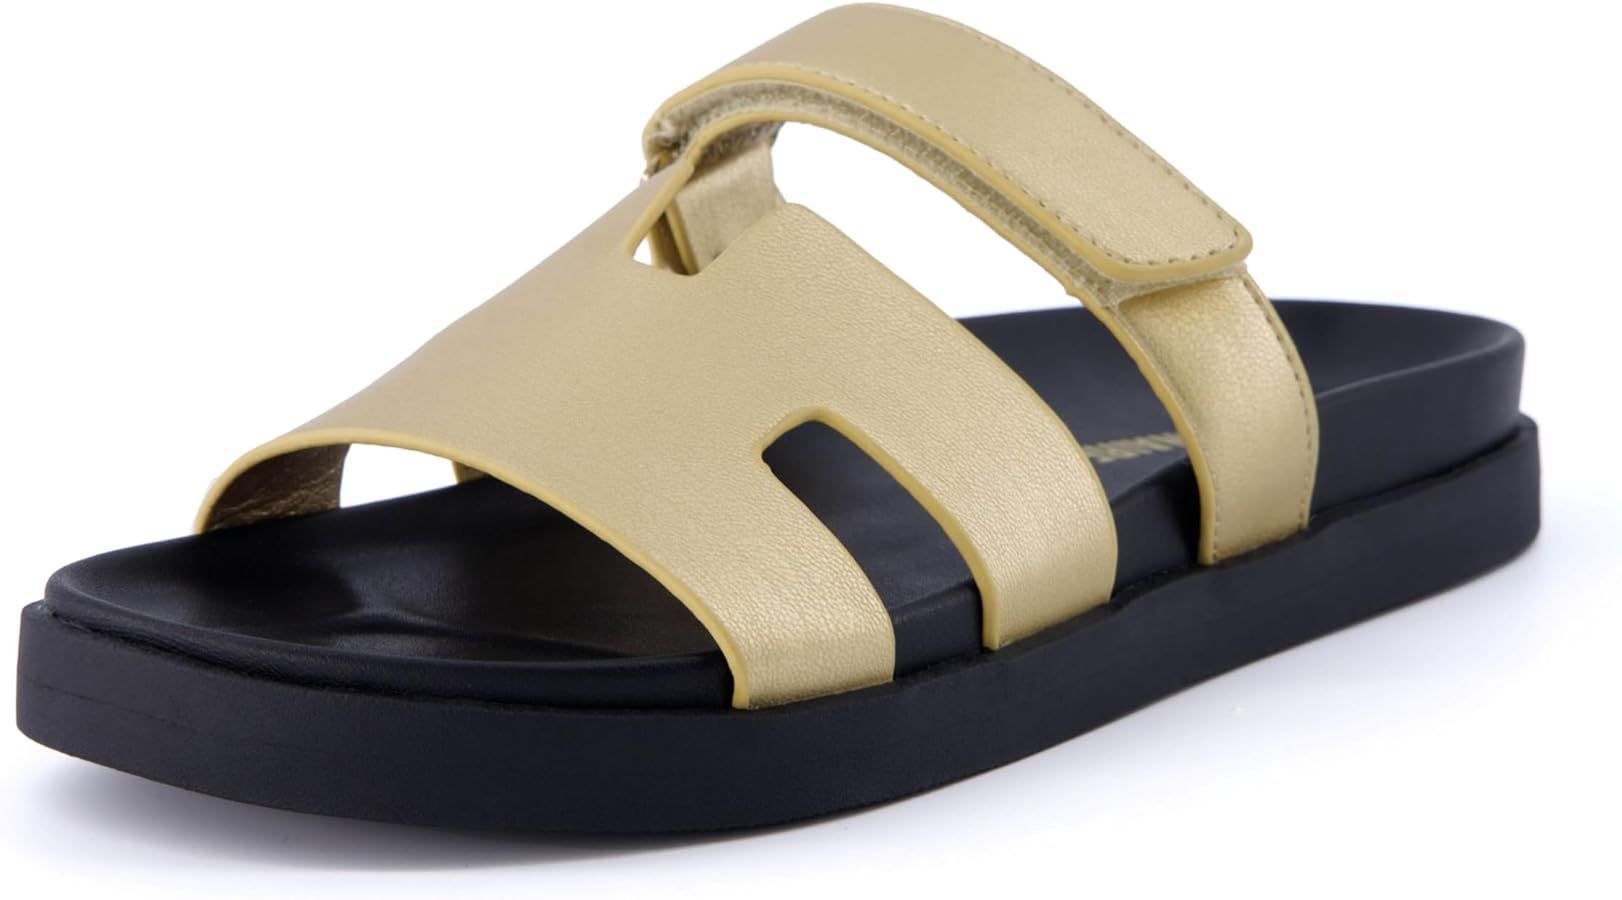 CUSHIONAIRE Women's Lotto footbed sandal with +Comfort, Wide Widths Available | Amazon (US)